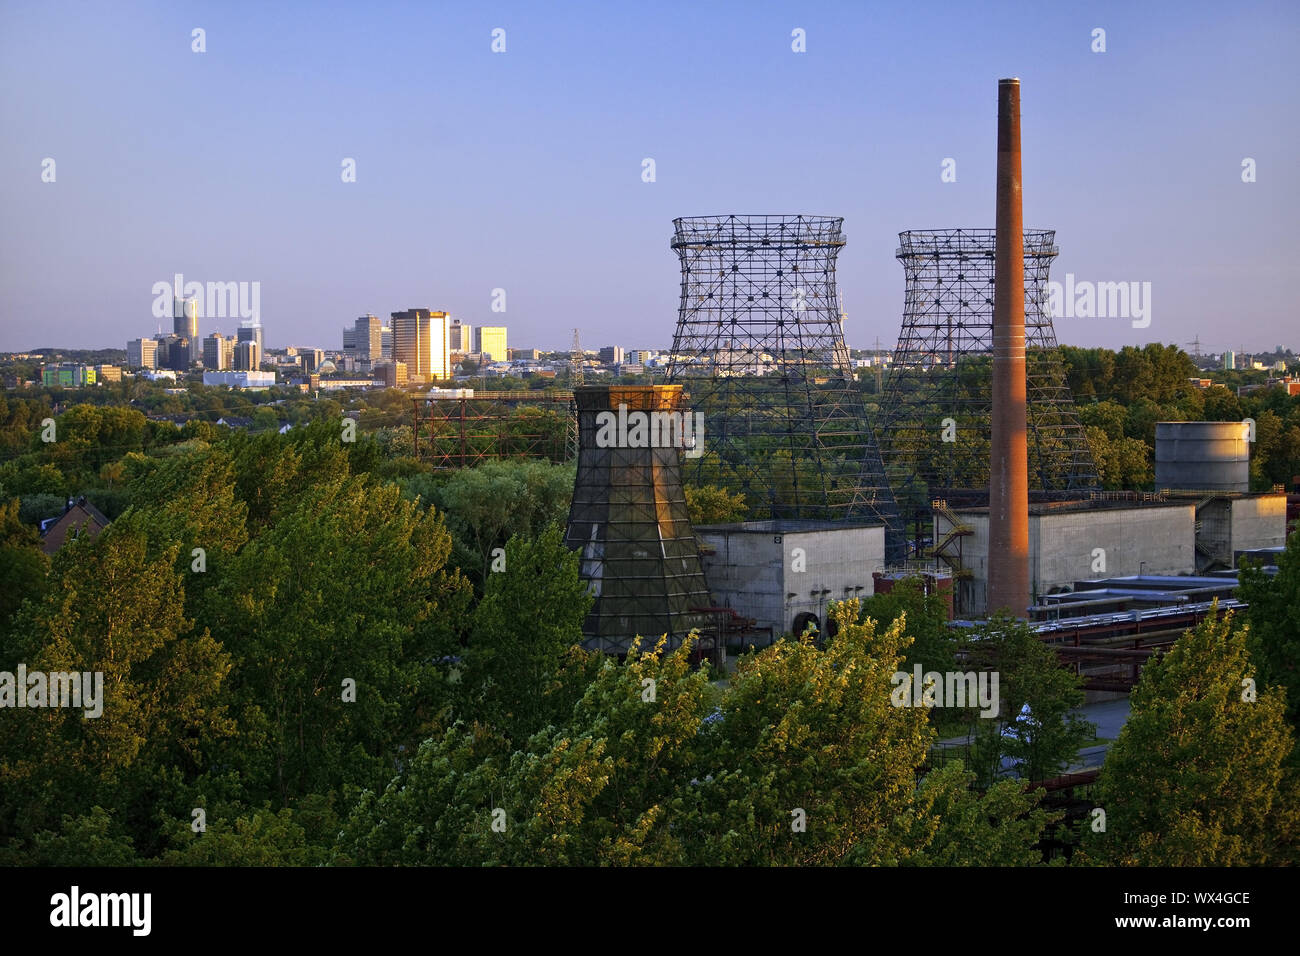 Cooling towers of the Zollverein coking plant and the skyline of the city centre, Essen, Germany Stock Photo